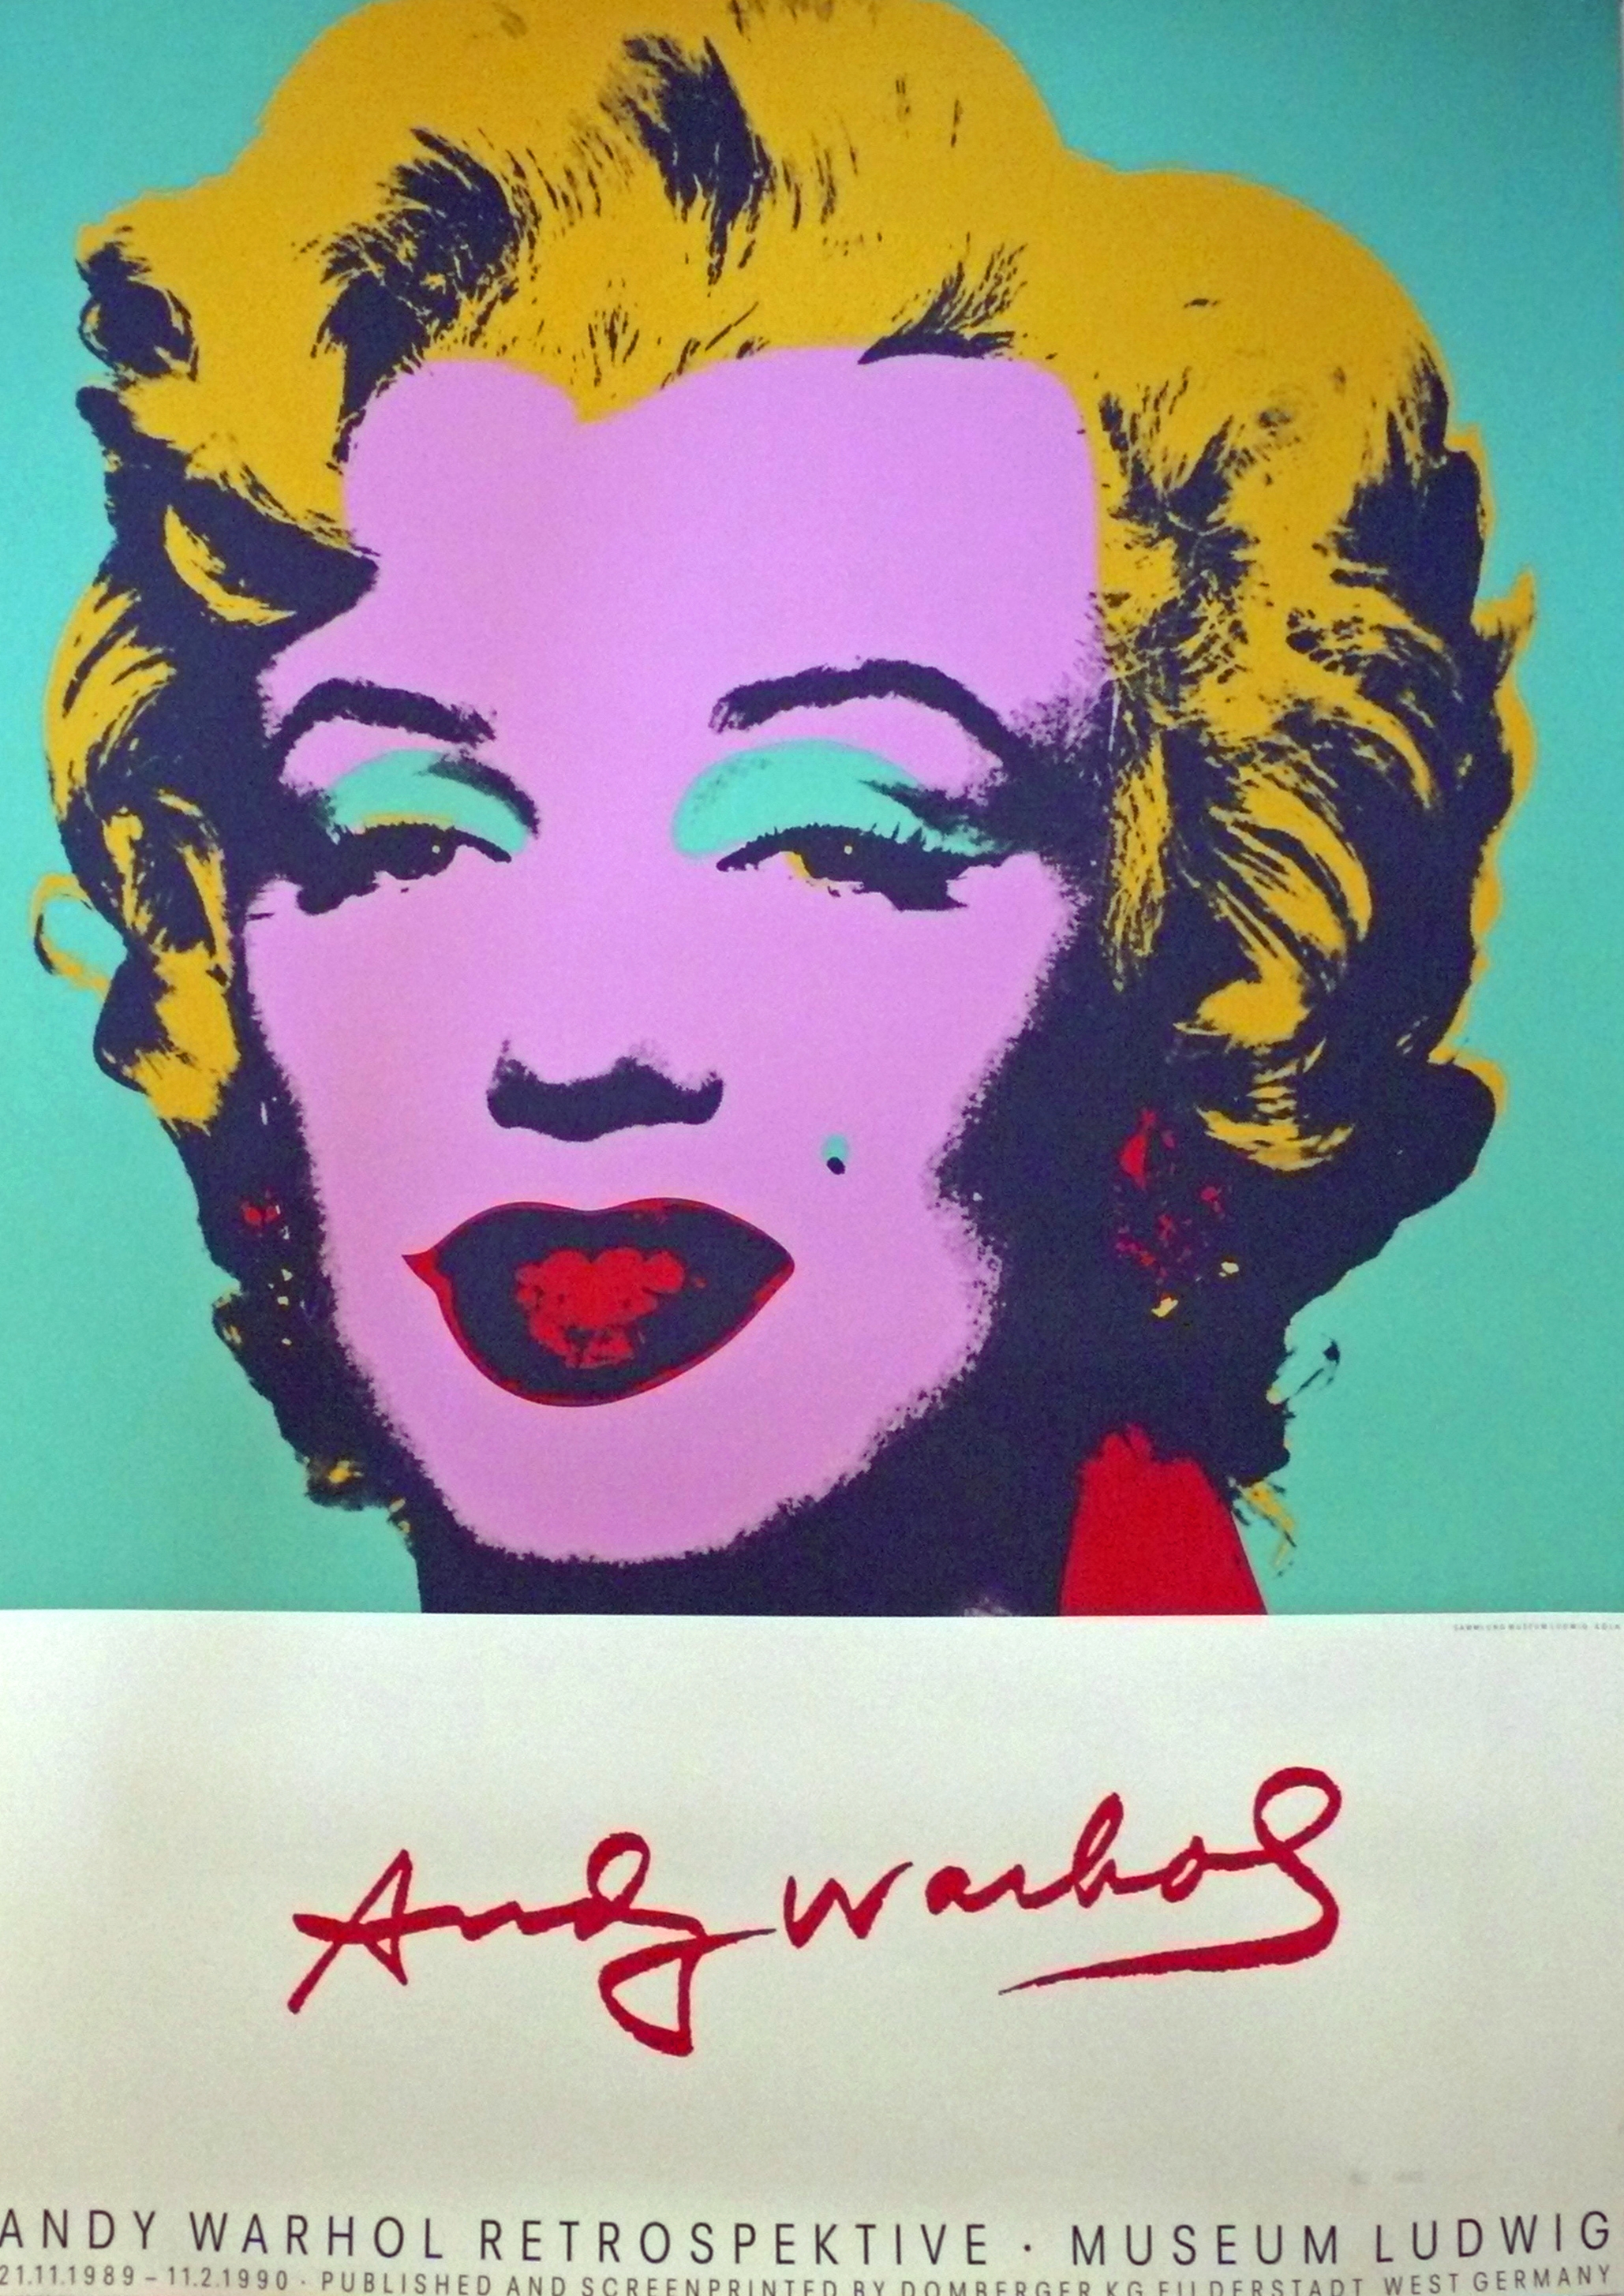 andy-warhol-retrospective-exhibition-poster-from-the-ludwig-museum-prints-and-multiples-serigraph-screenprint-zoom.jpg